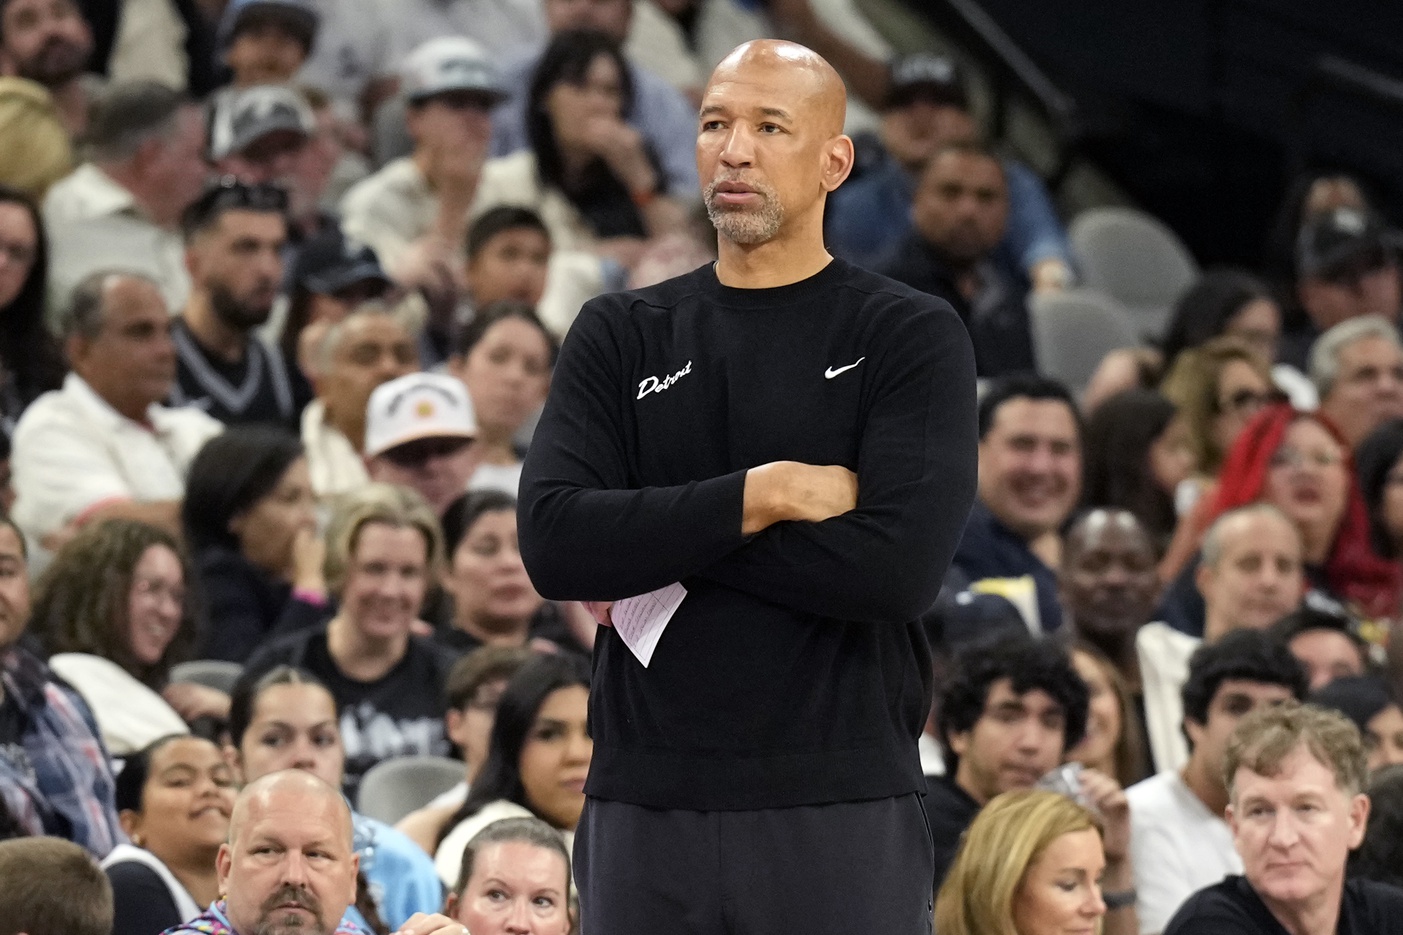 Detroit Pistons head coach Monty Williams observes his team during the second half against the San Antonio Spurs at Frost Bank Center.